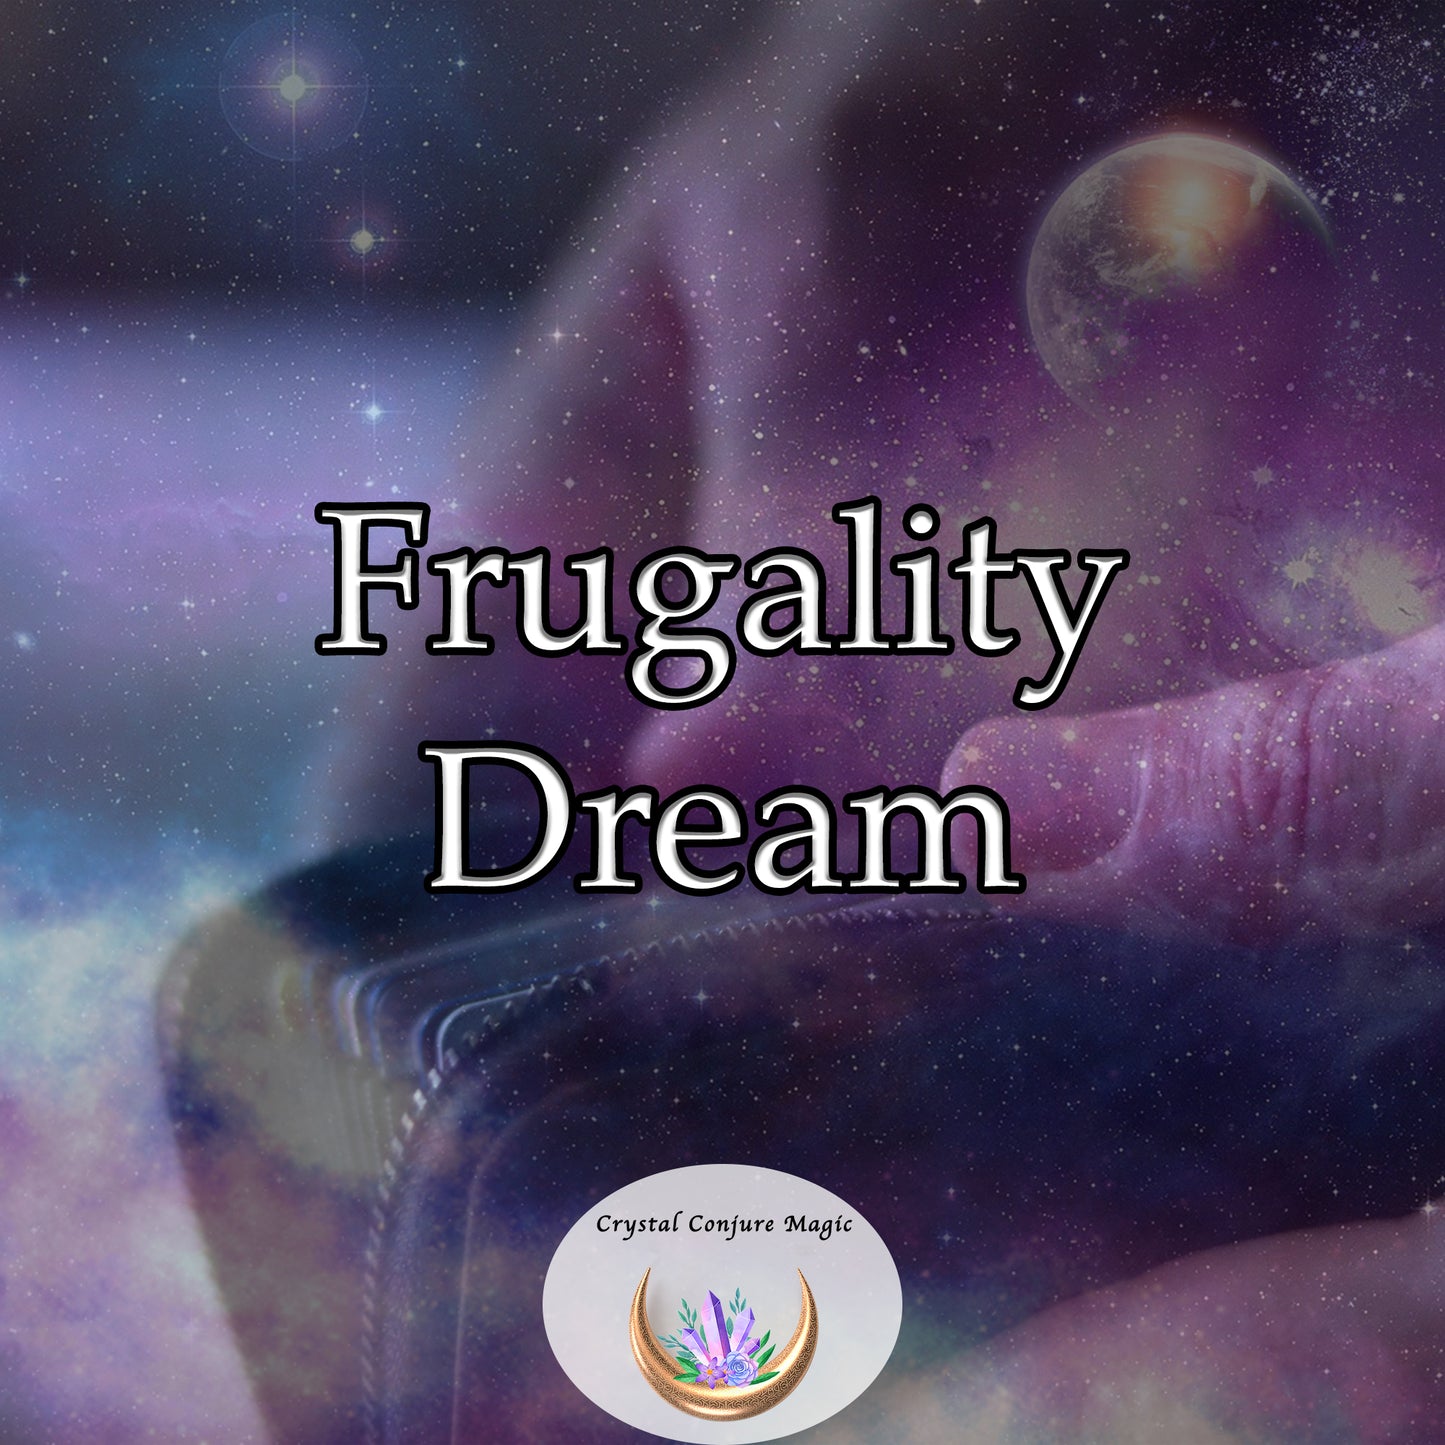 Frugality Dream - make wise spending choices and embrace a thrifty lifestyle effortlessly